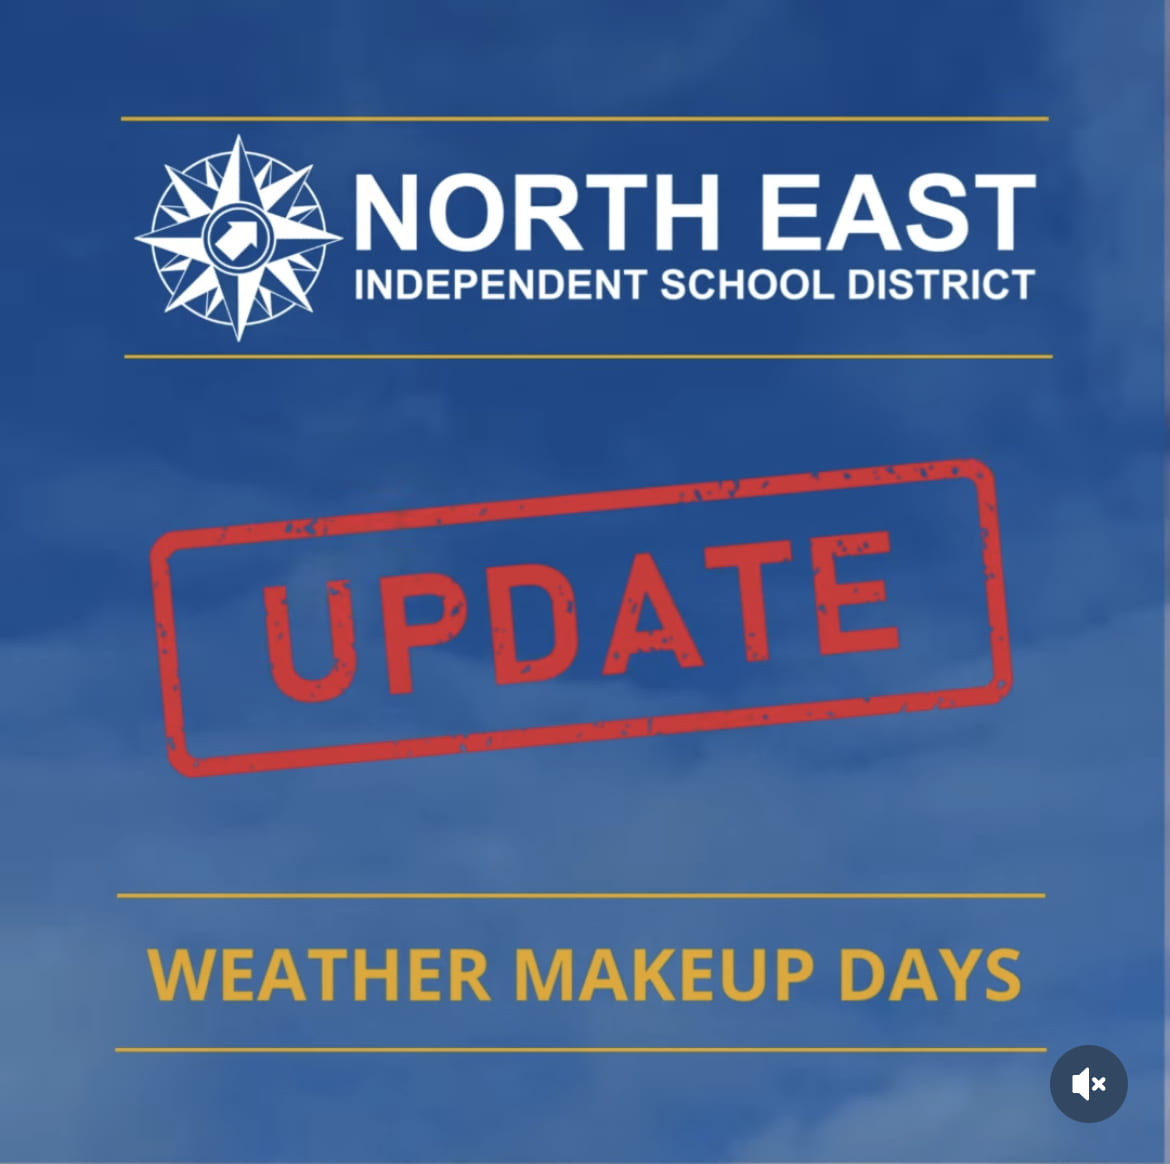 NEISD announced on Instagram an update on the bad weather makeup days. They used a small graphic with clouds in the background and red lettering that said "update."